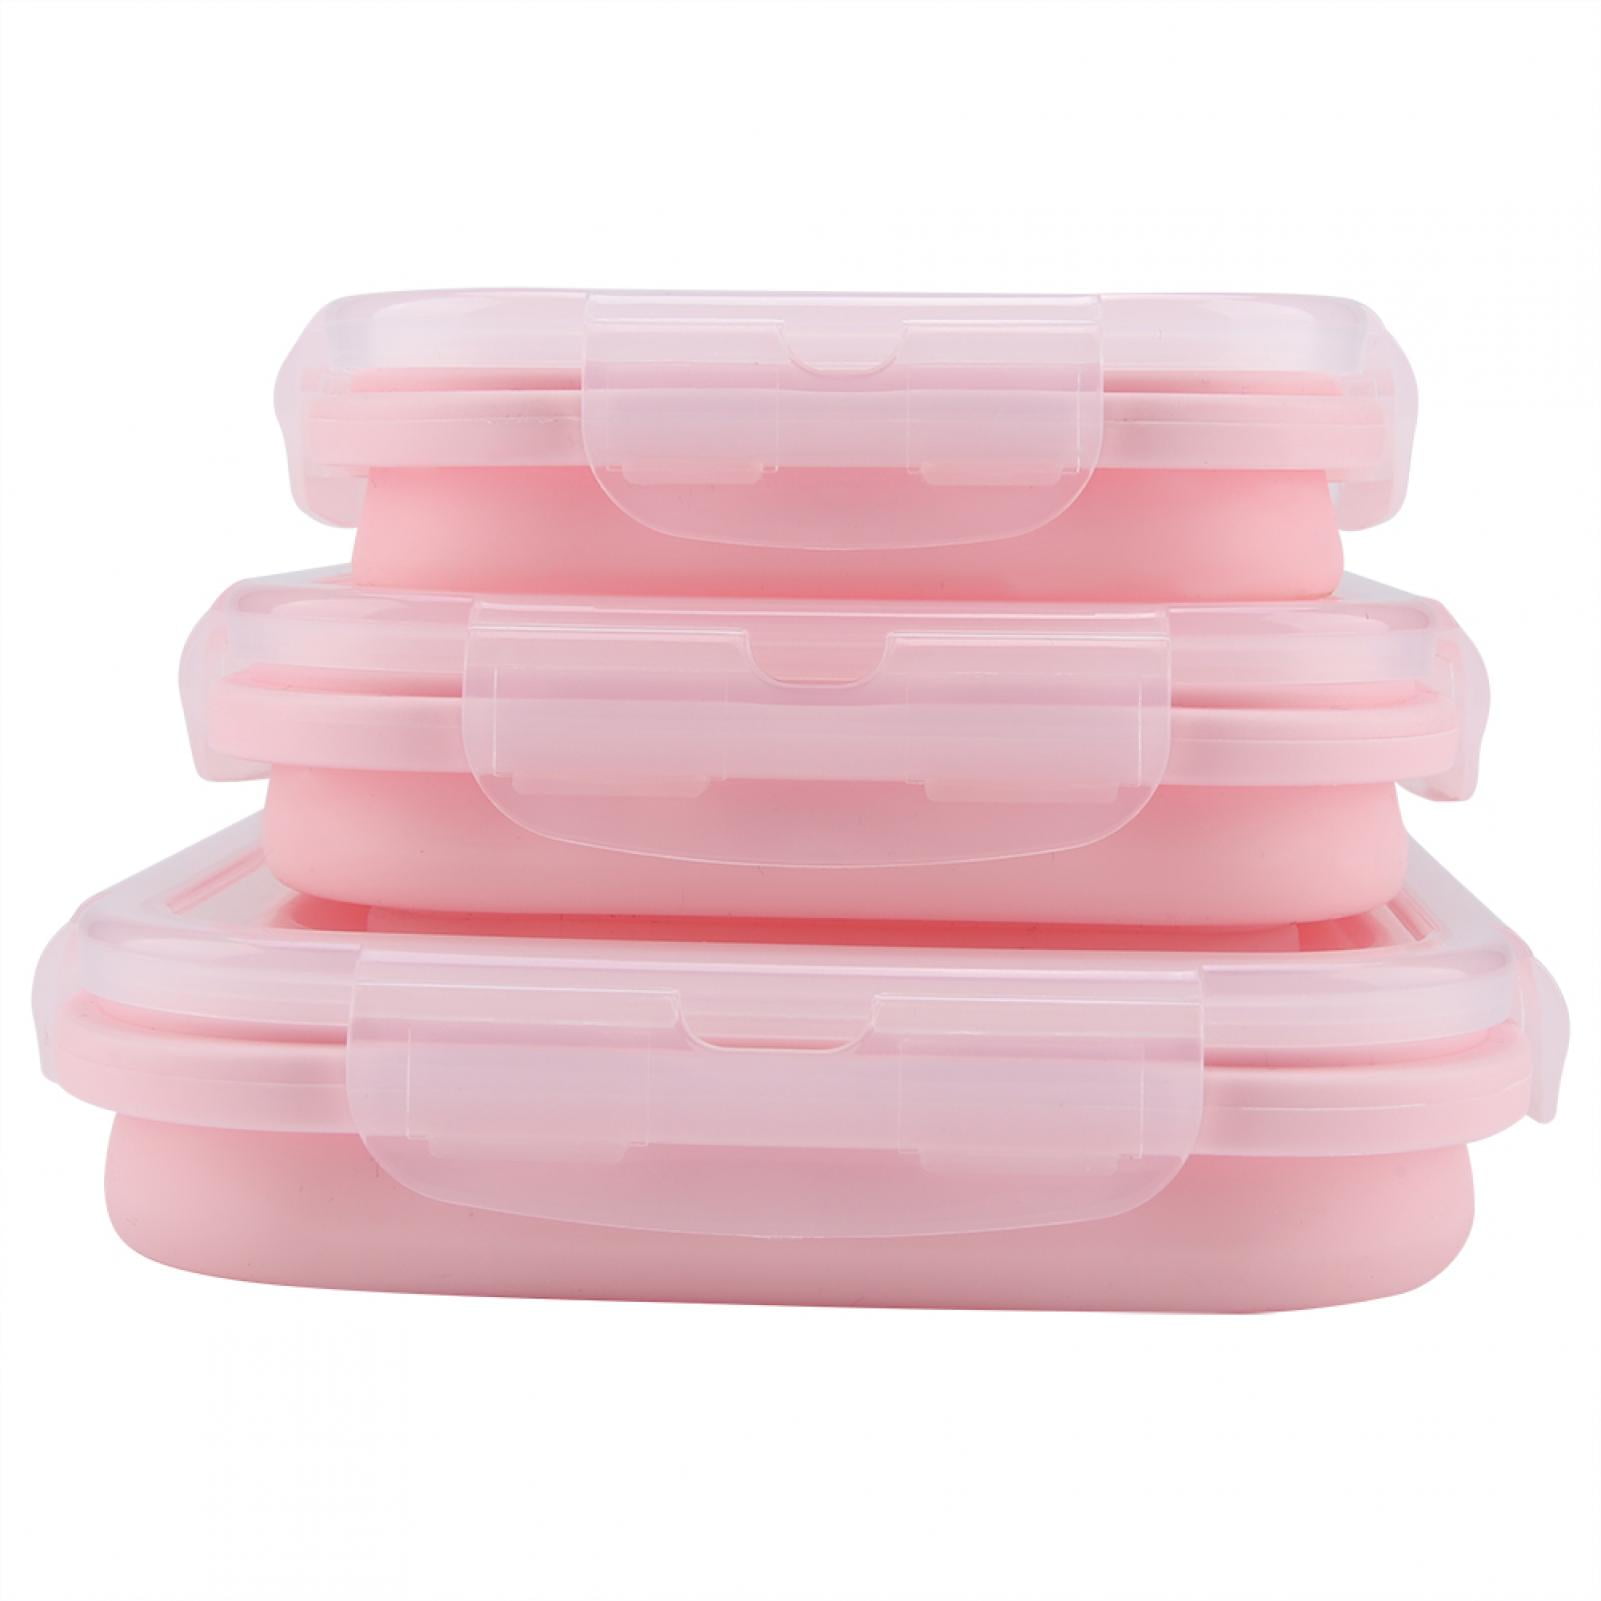 1.5L/52oz Portable Salad Lunch Container To Go with 3 Compartment Trays for  Adult, Men, Women, Snack, Salad Topping - AliExpress